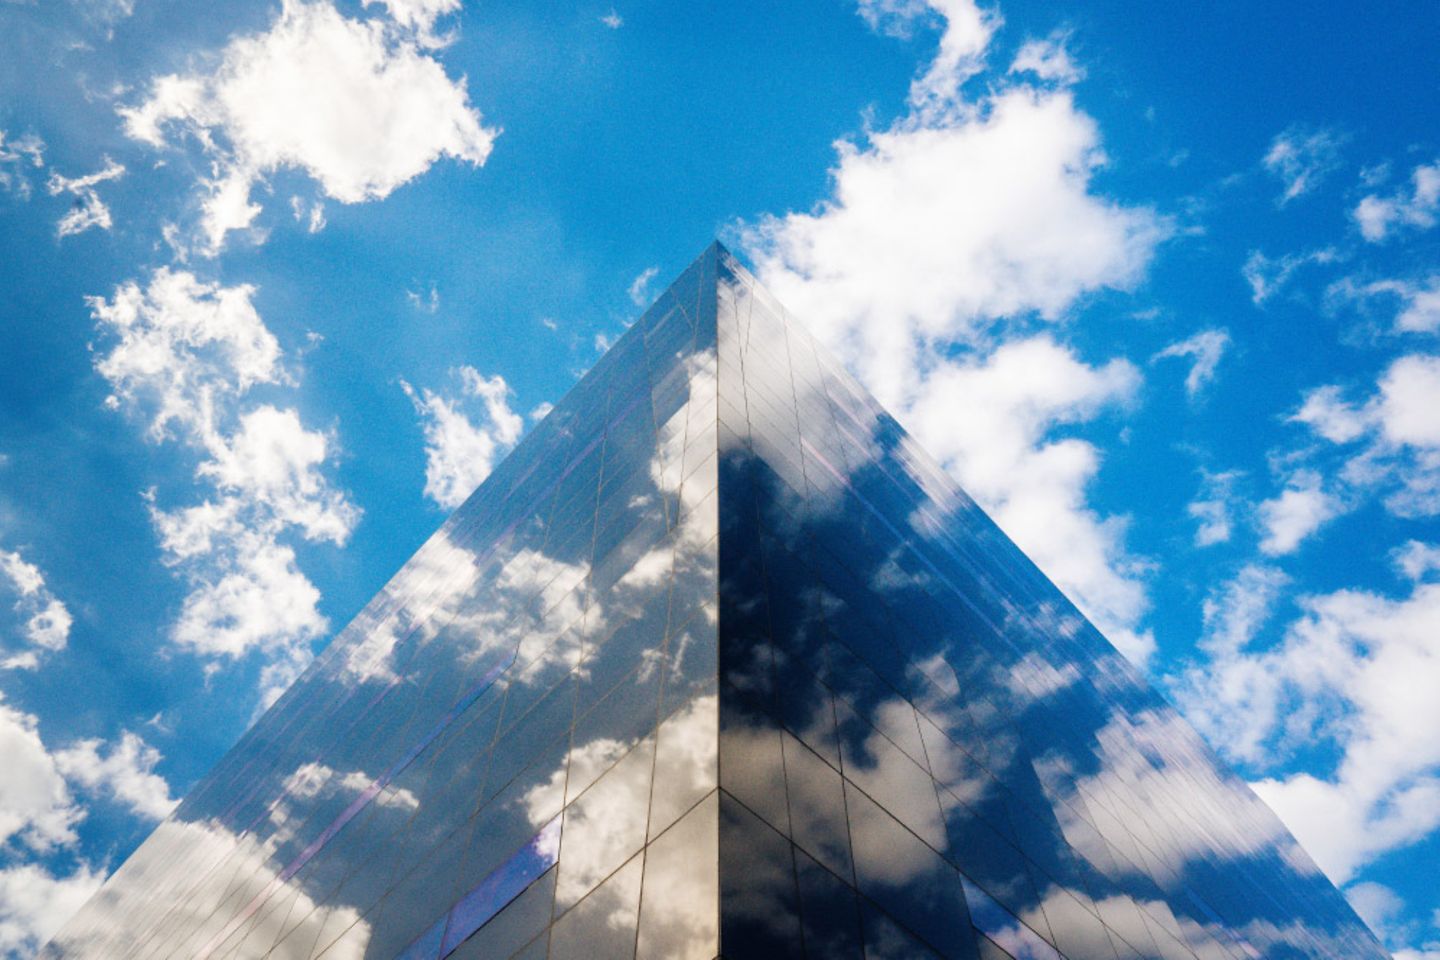 Sky reflecting on building